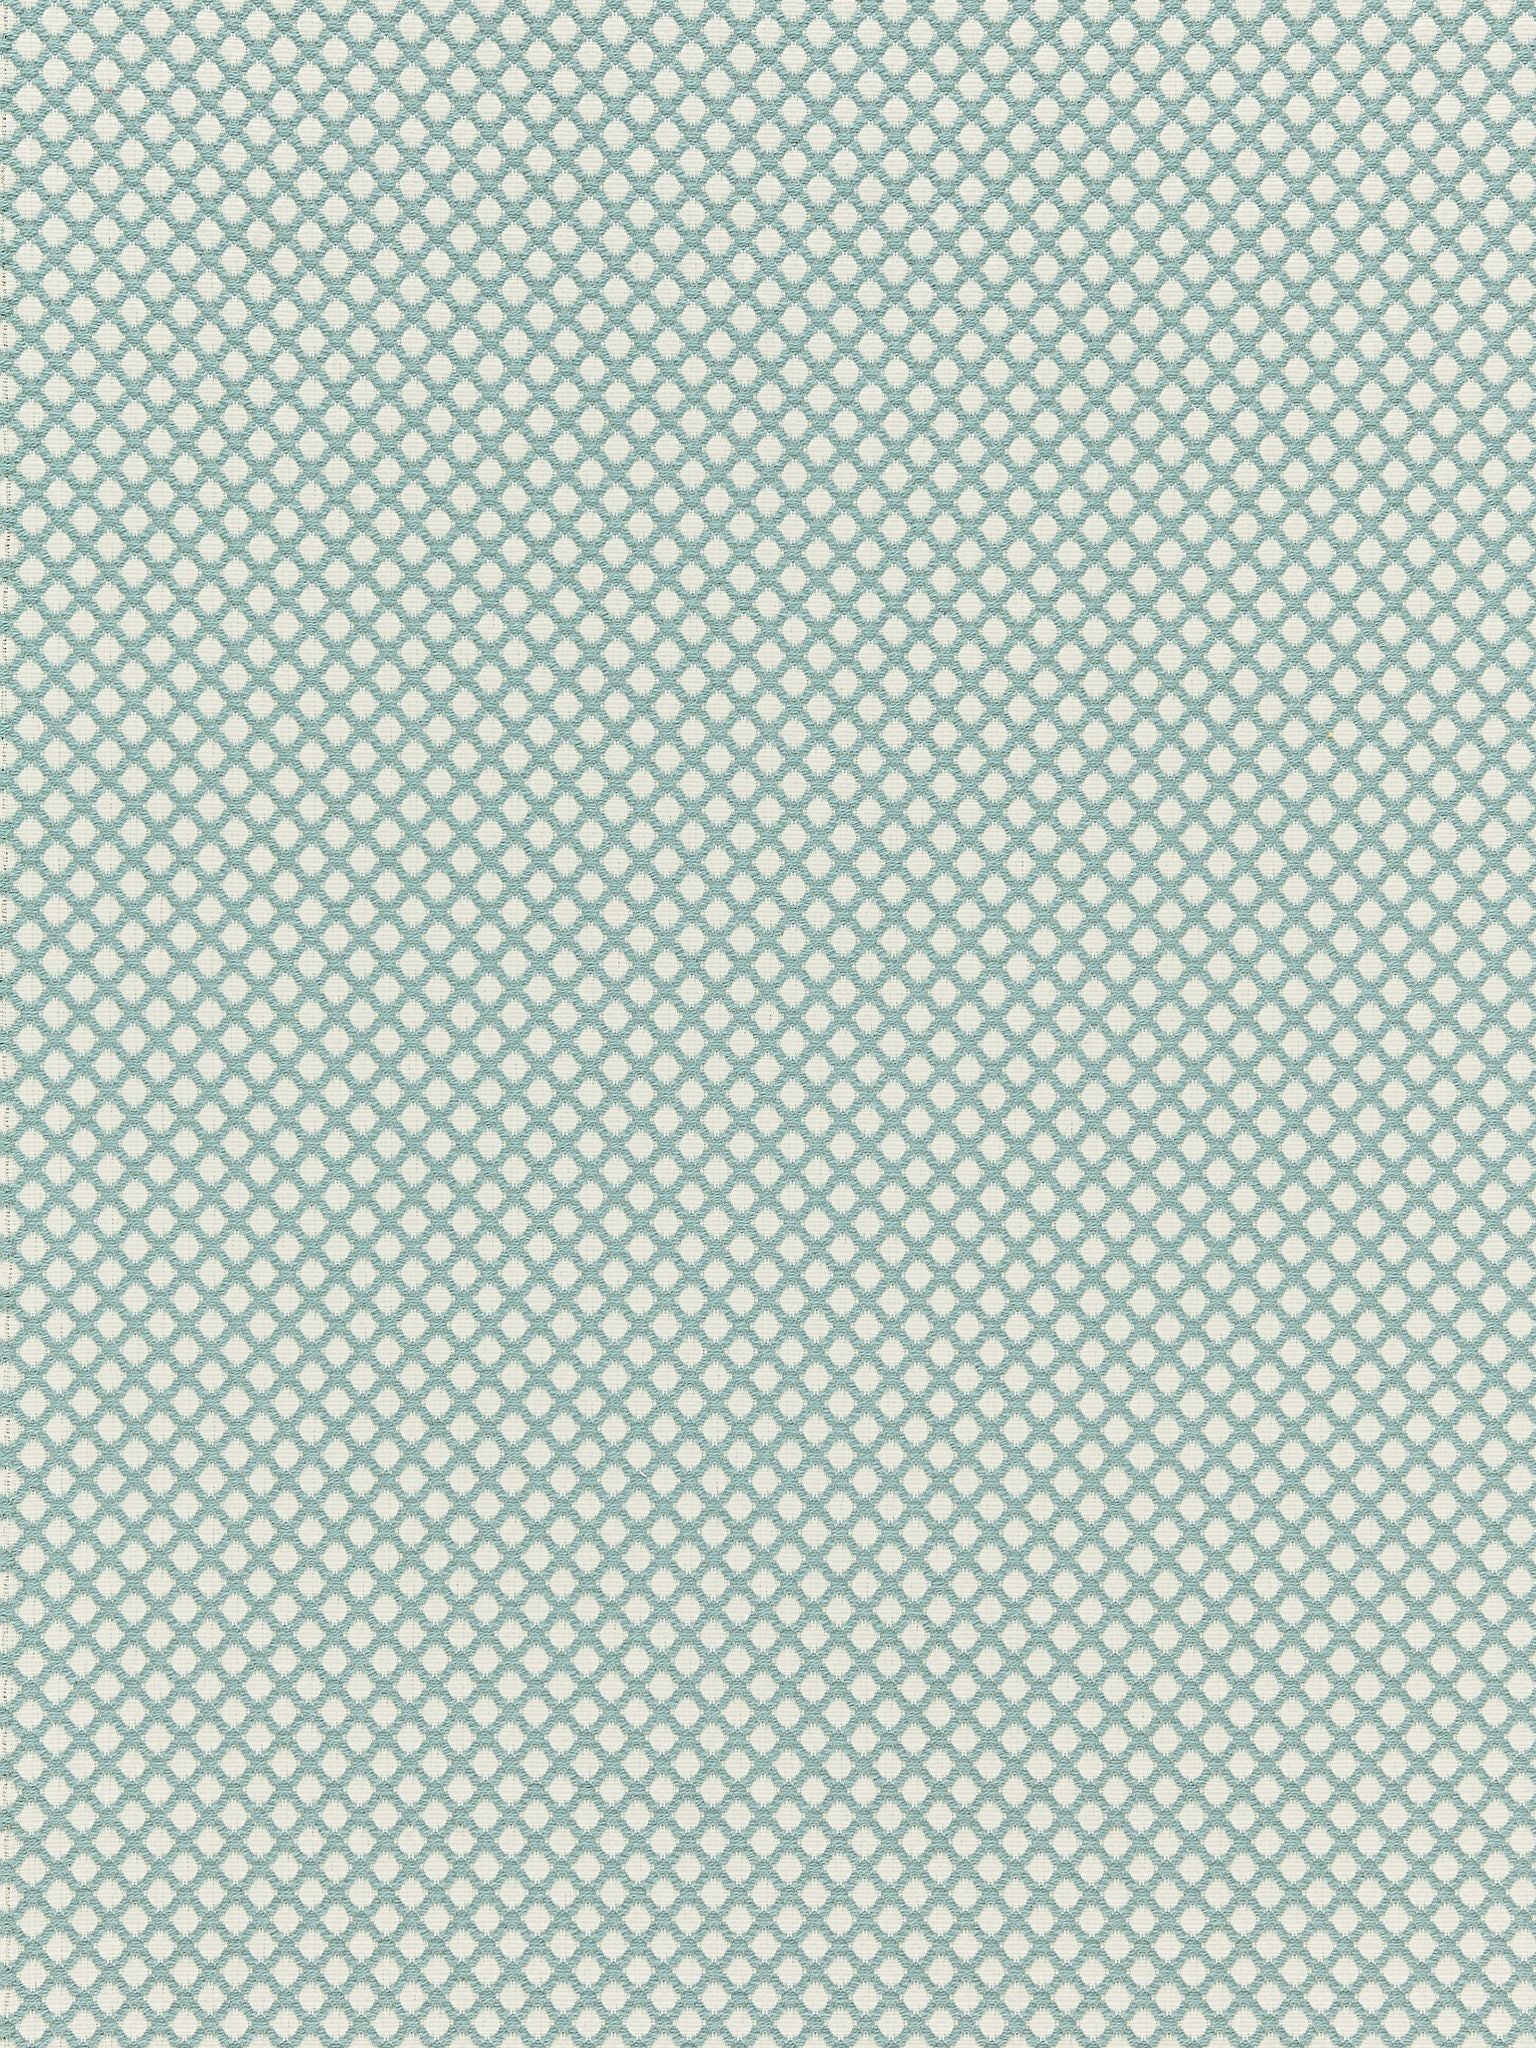 Bellaire Trellis fabric in mineral color - pattern number BK 0002K65121 - by Scalamandre in the Old World Weavers collection